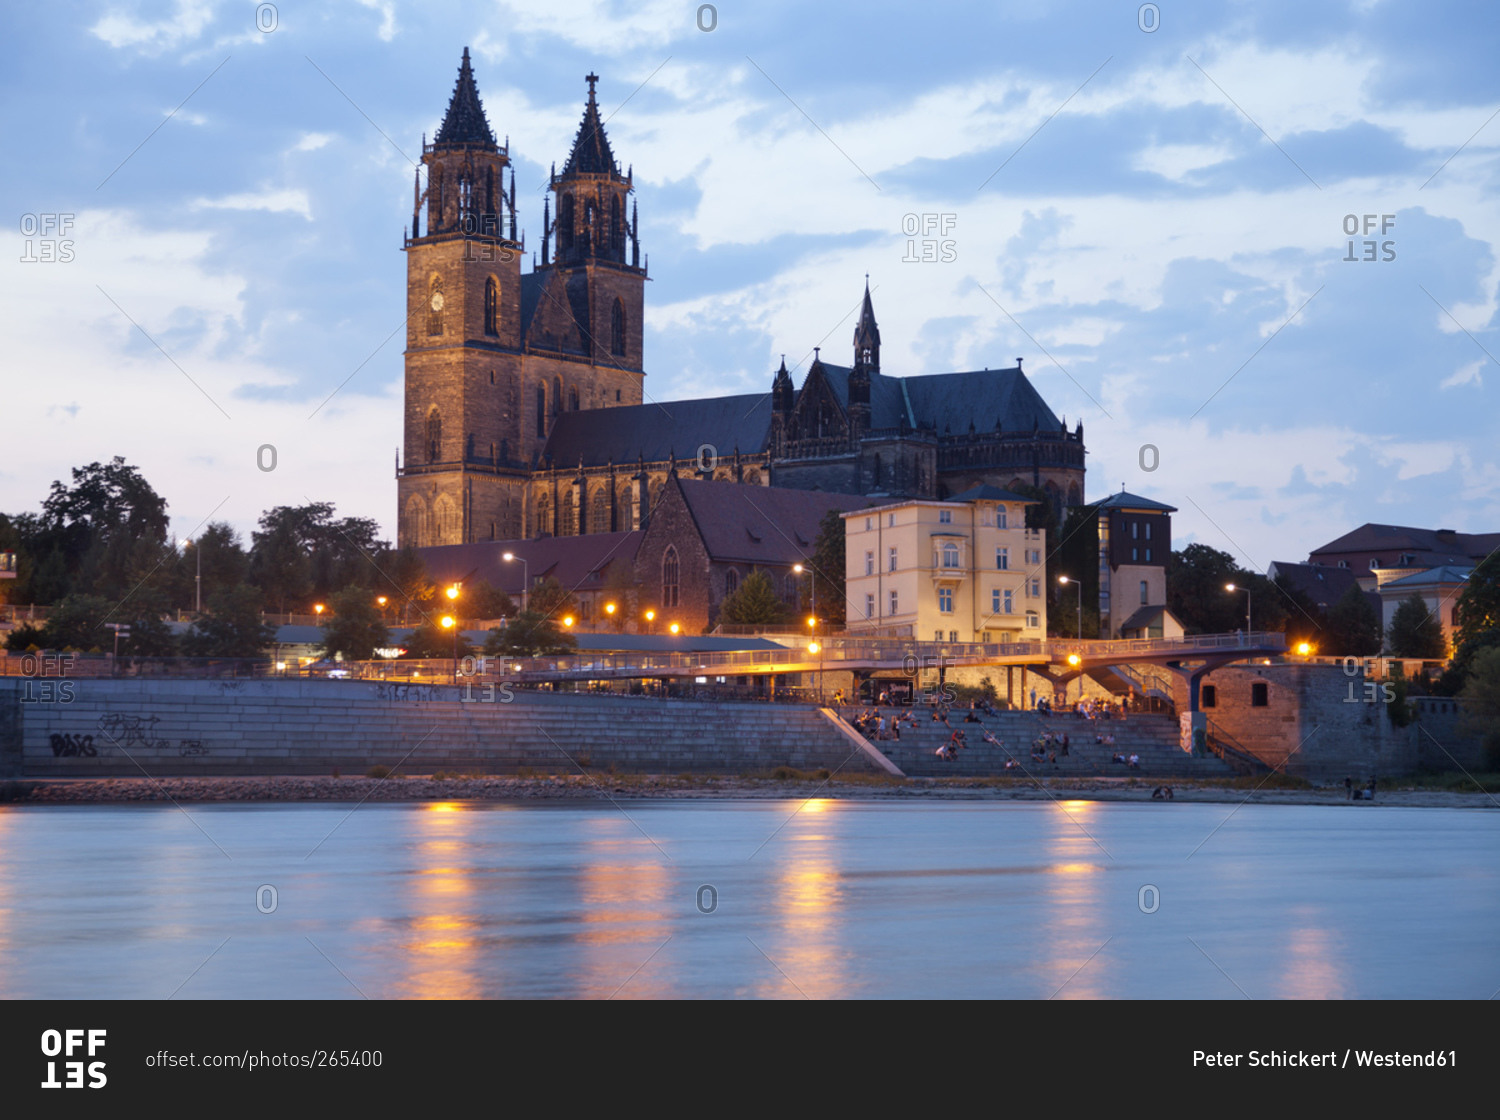 Banks of the Elbe and the Cathedral of Magdeburg at dusk, Magdeburg